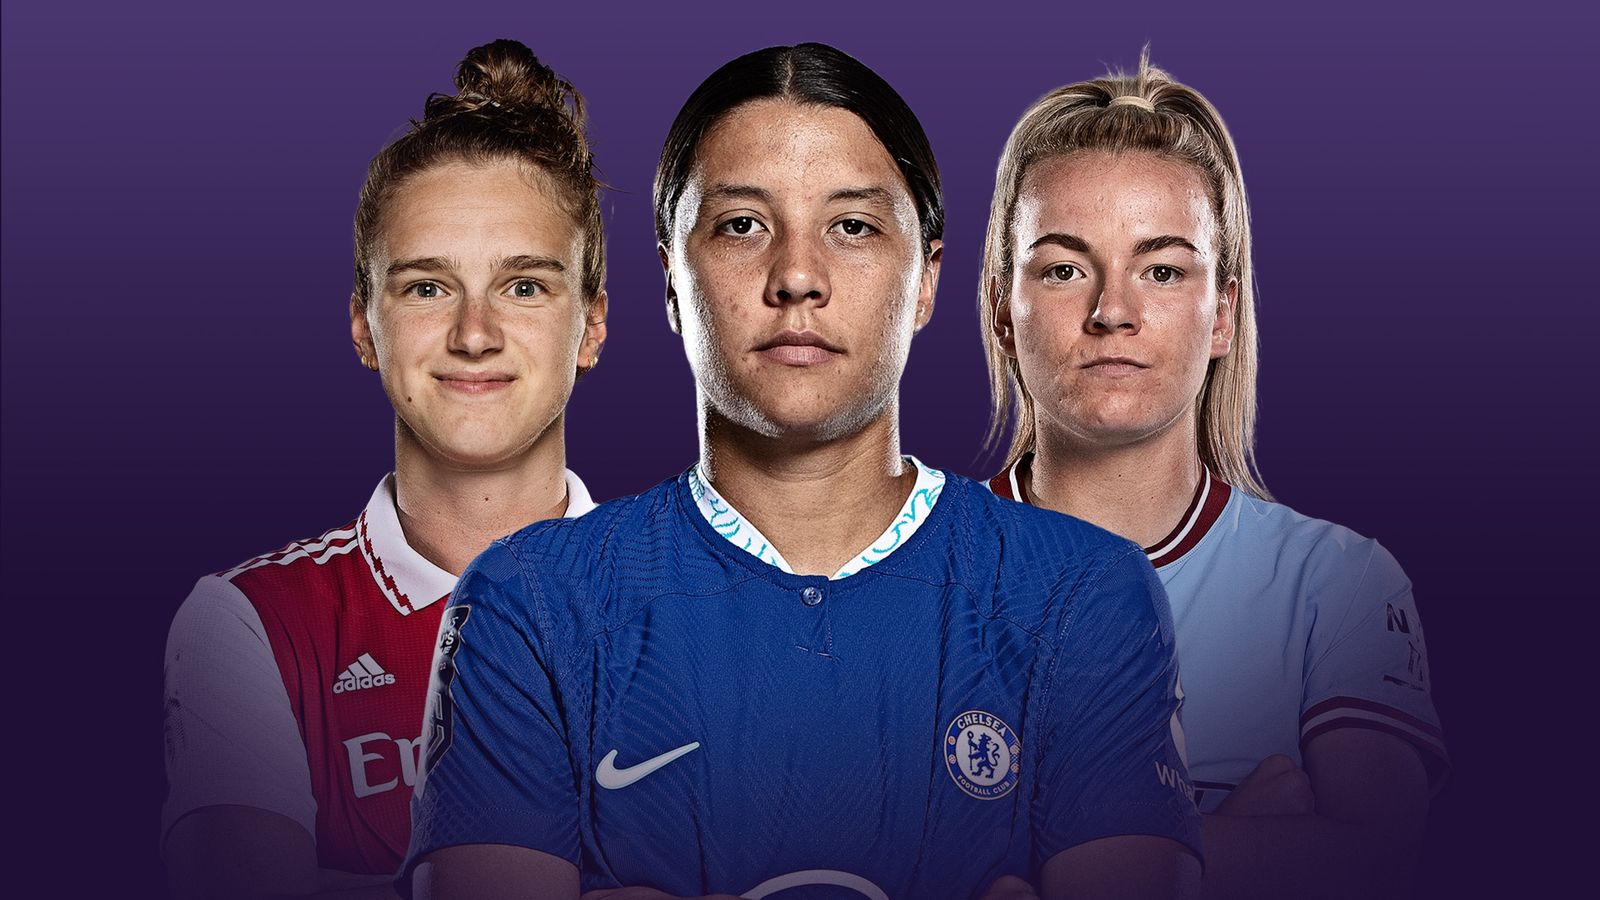 Chelsea Women head coach Emma Hayes excited for ‘blockbuster’ WSL weekend